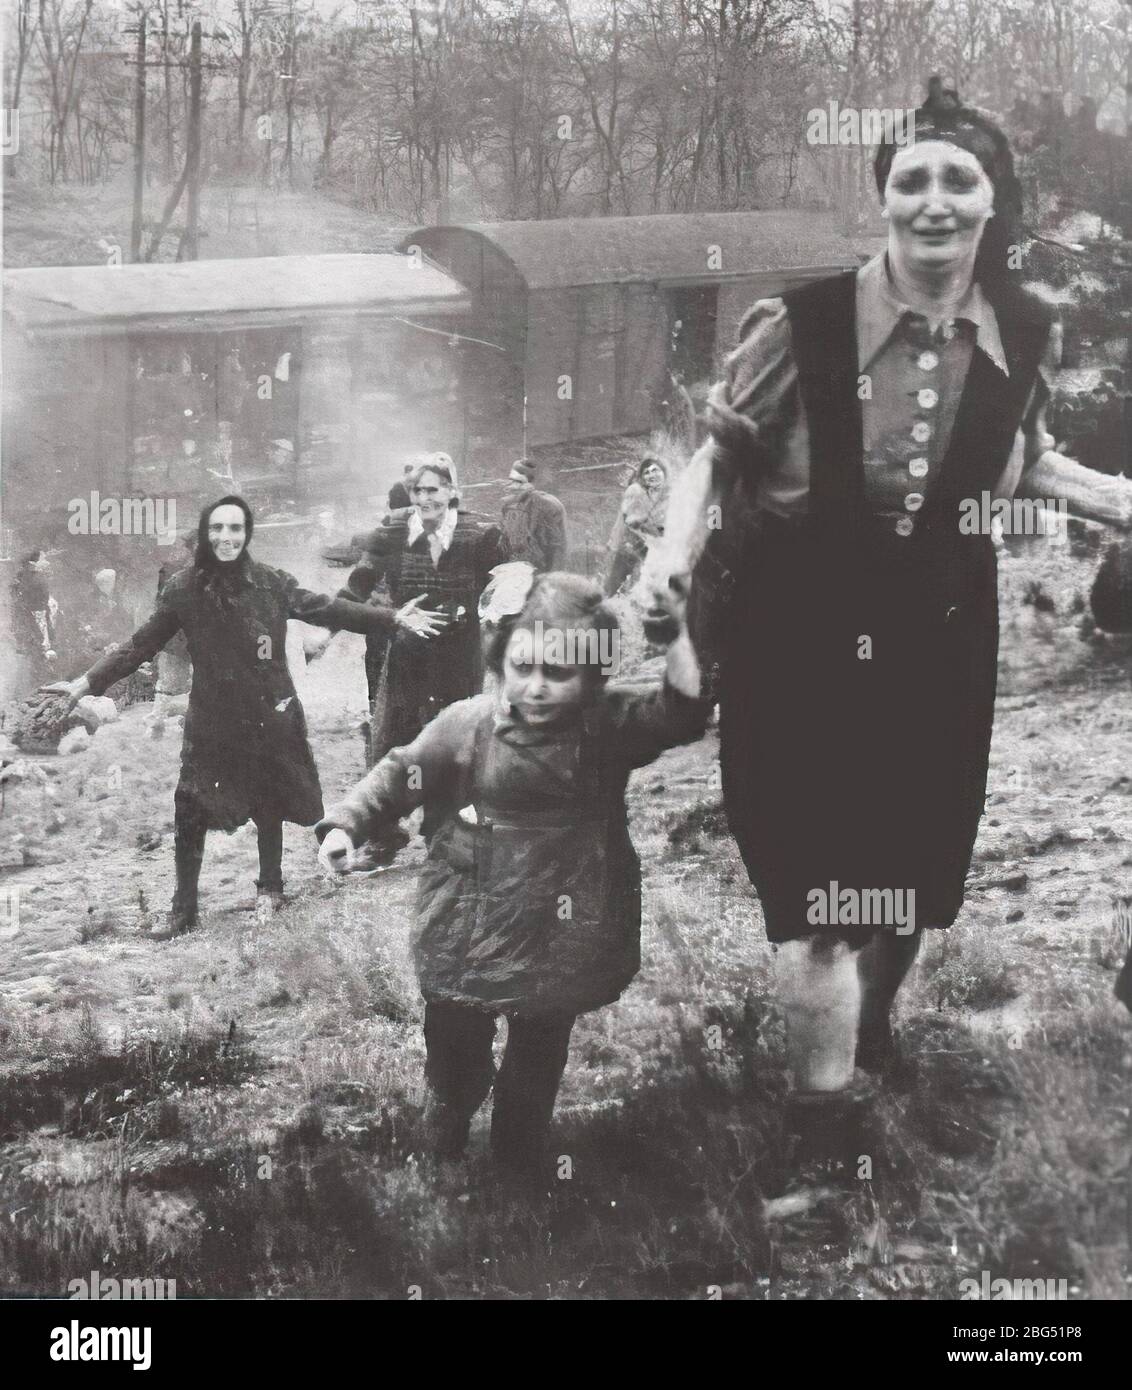 Second World War documentary. Some of the 2,141 prisoners just freed from their train, bound for an extermination camp, by U.S. soldiers near Madgeburg, Germany on April 13, 1945. Stock Photo